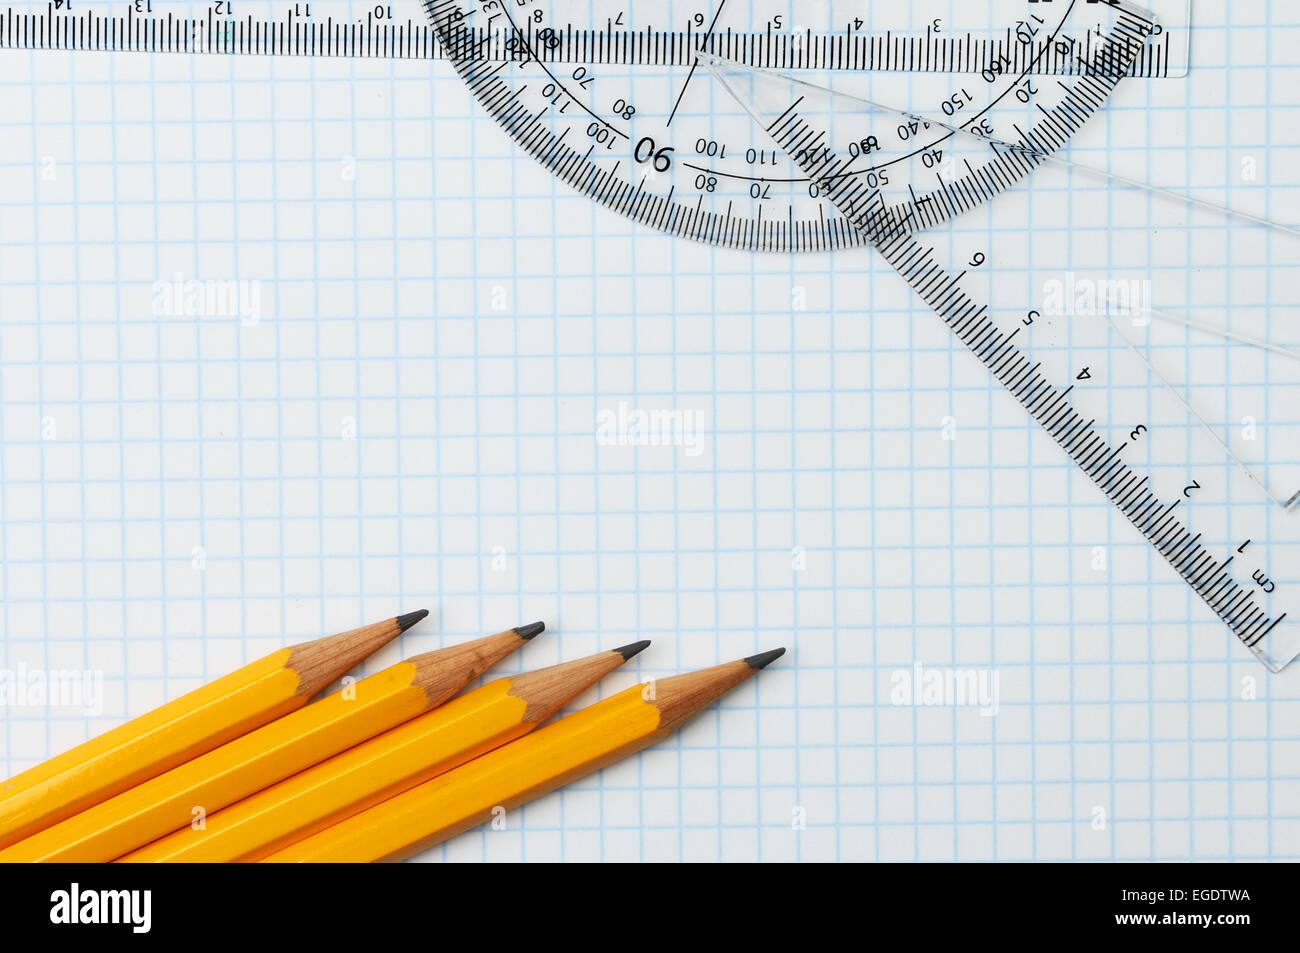 Pencils, rule,protractor and set square on graph paper Stock Photo